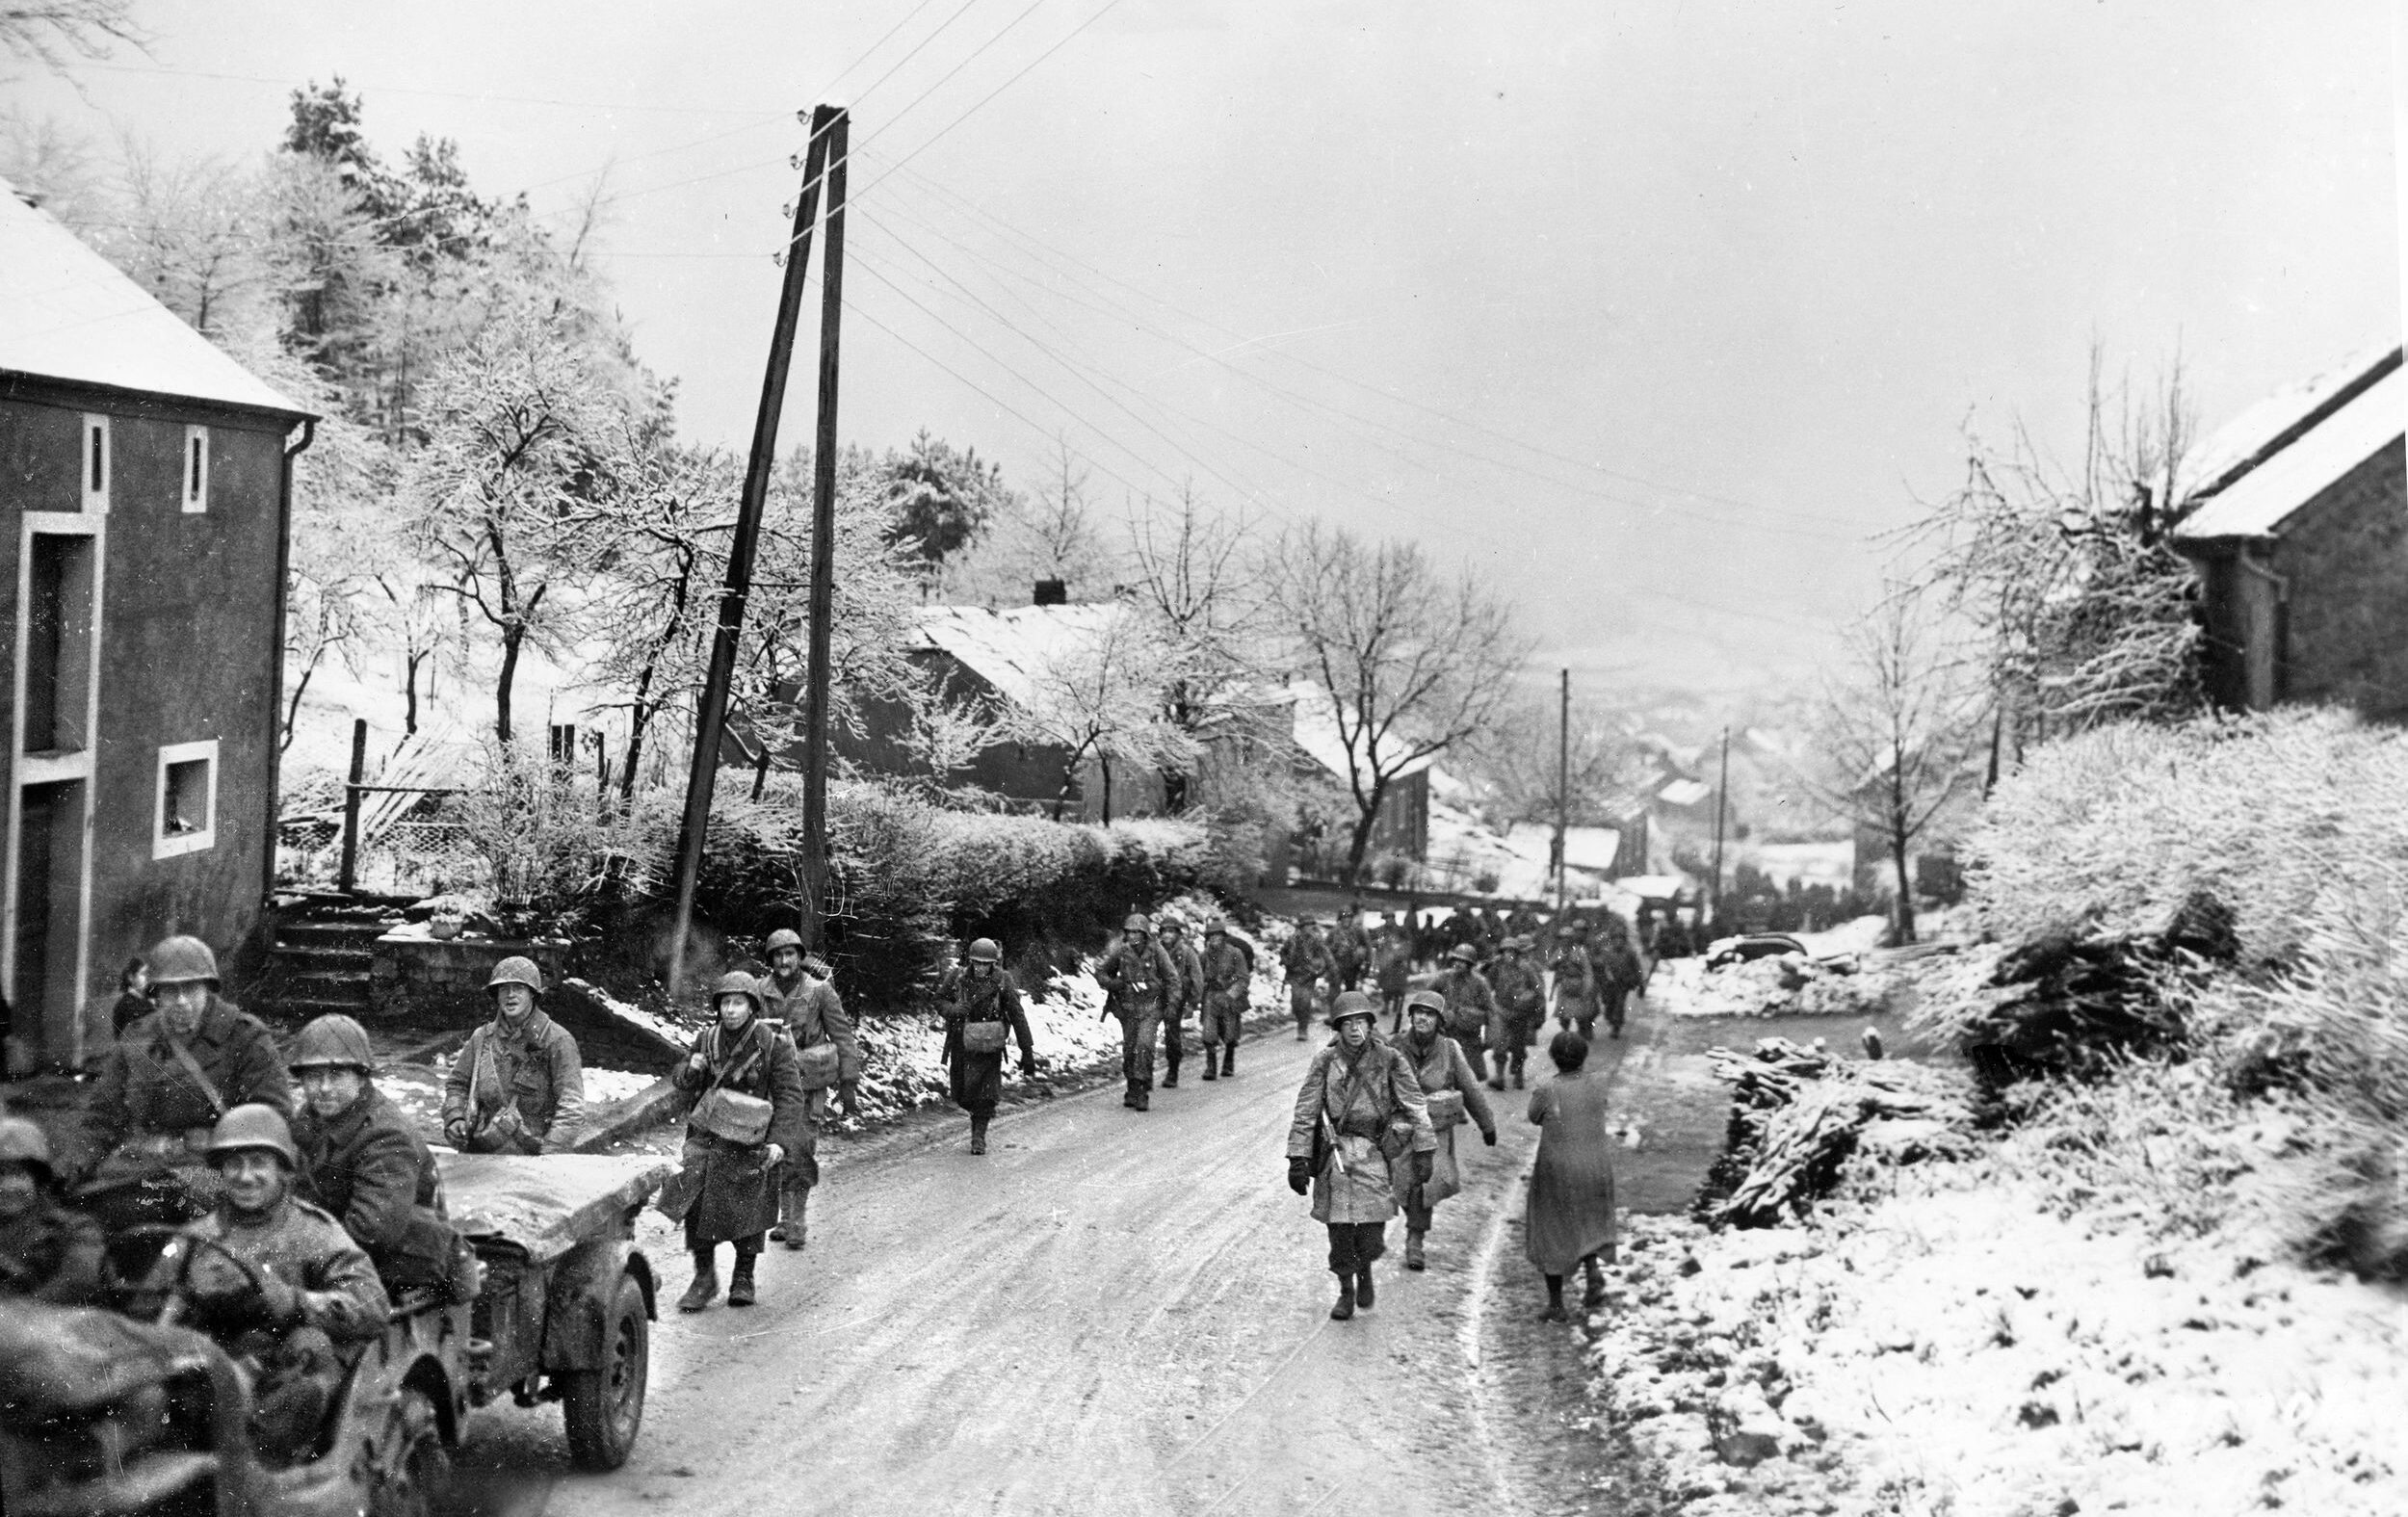 This photo was taken on December 23, 1944, during the rapid movement of Third Army toward Bastogne and the city of Echternach, Luxembourg, at the height of the Battle of the Bulge. These troops are Americans of the 101st Infantry Regiment, 26th Division moving through the town of Hobsheid, Belgium.